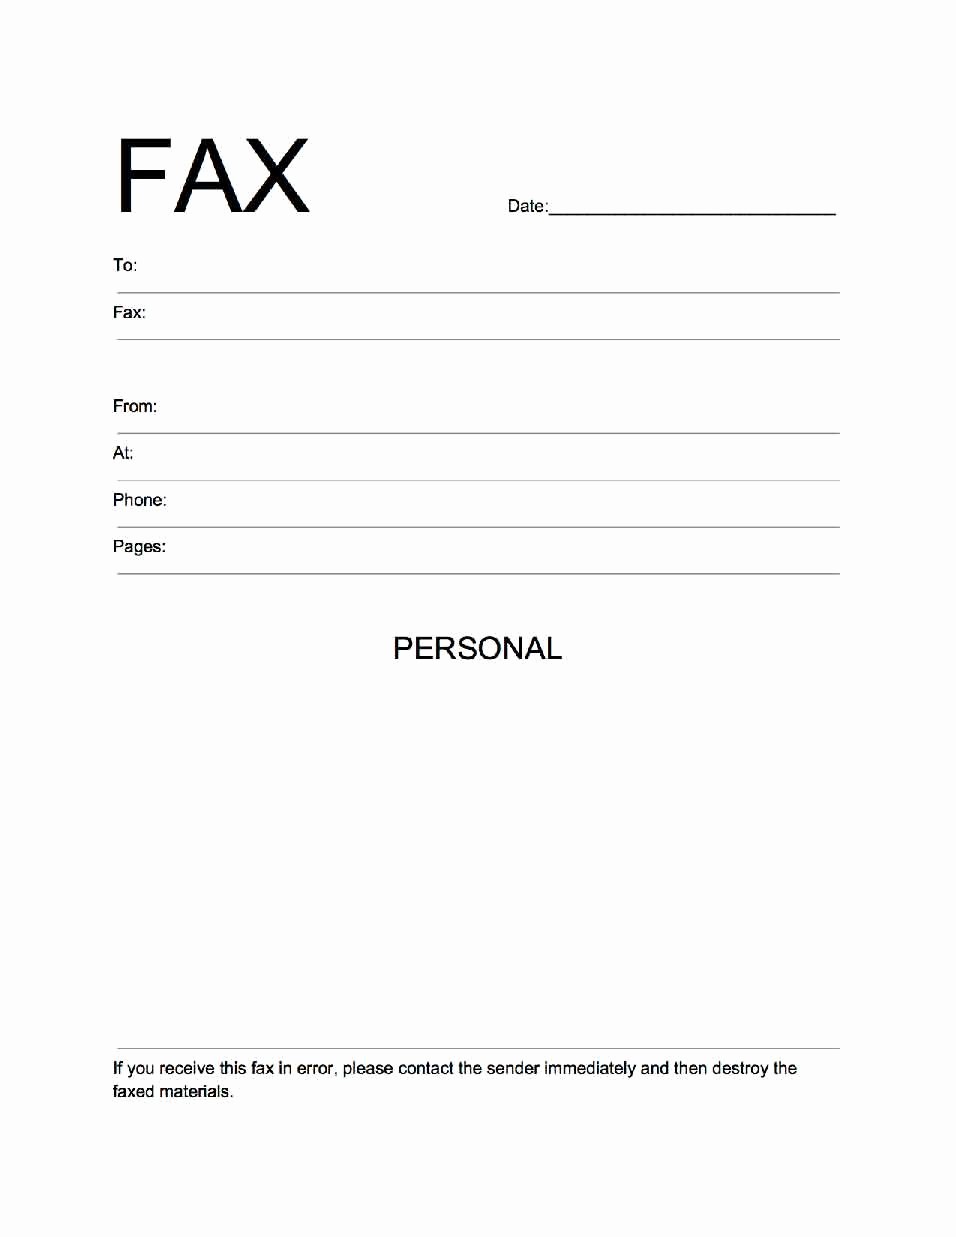 Cover Page for A Fax Luxury Personal Fax Cover Sheet Template